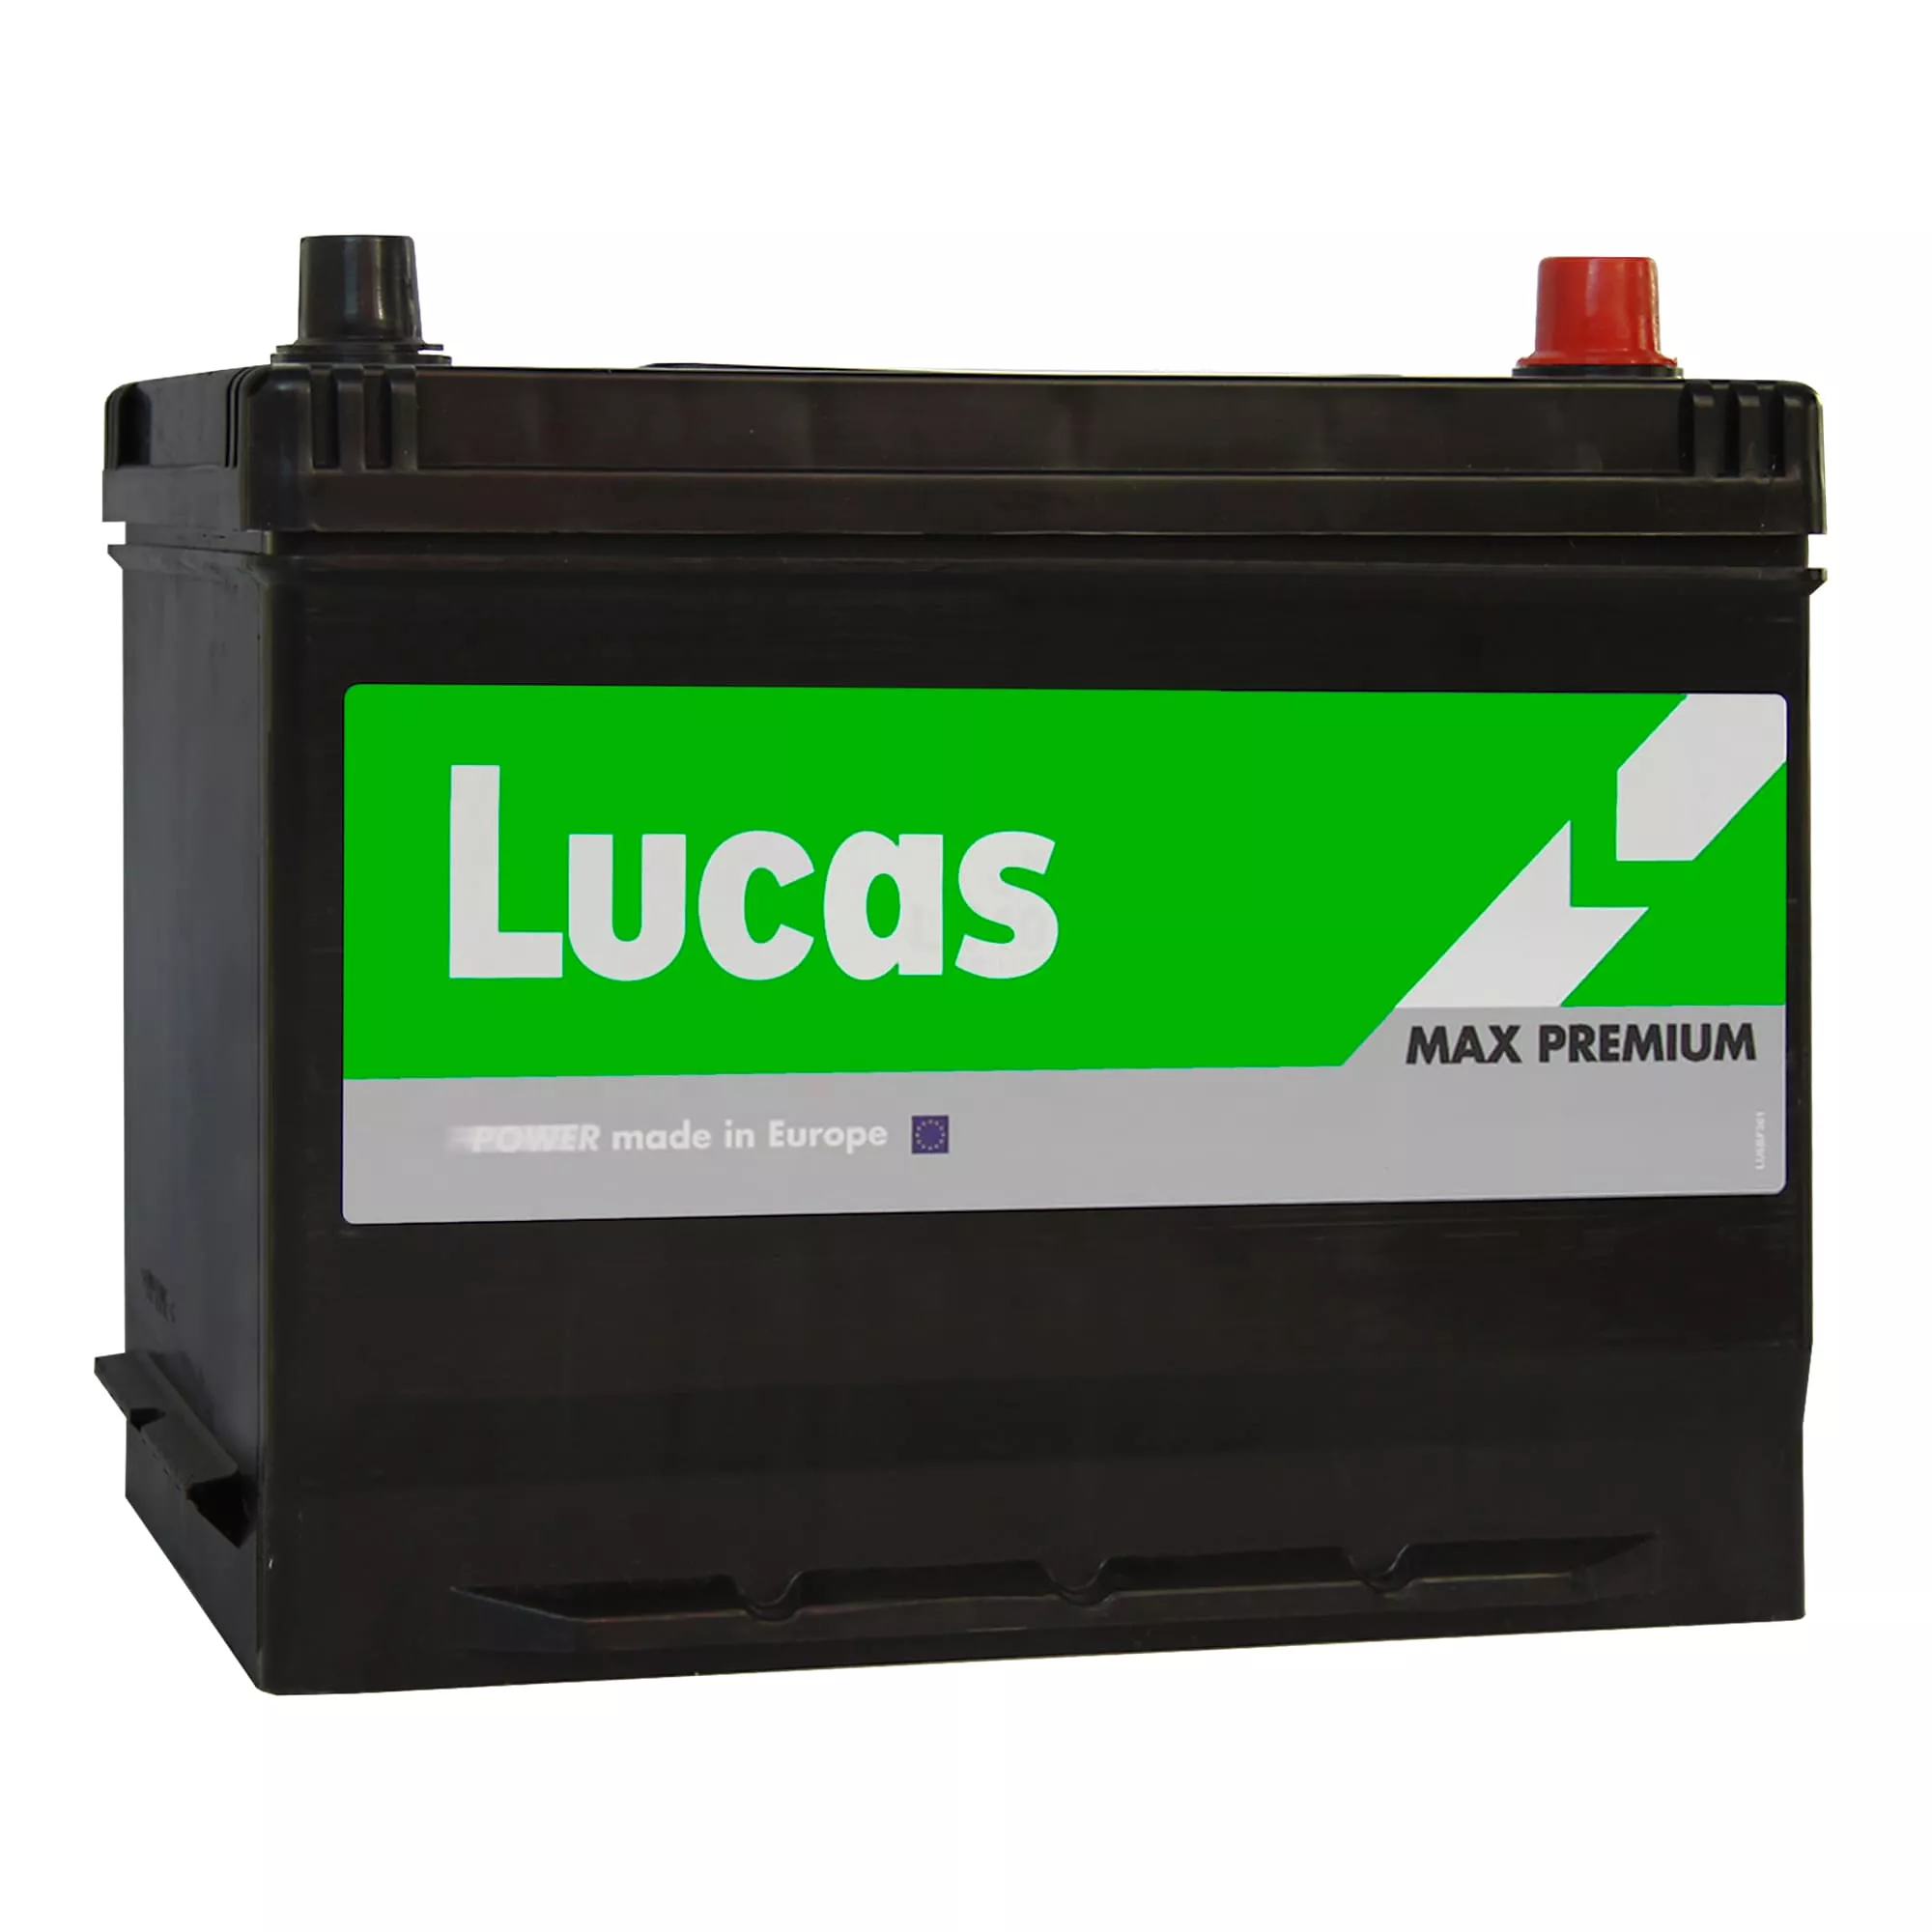 Аккумулятор Lucas (Batteries manufactured by Exide in Spain) 6CT-70 АзE Asia (LBP032A)